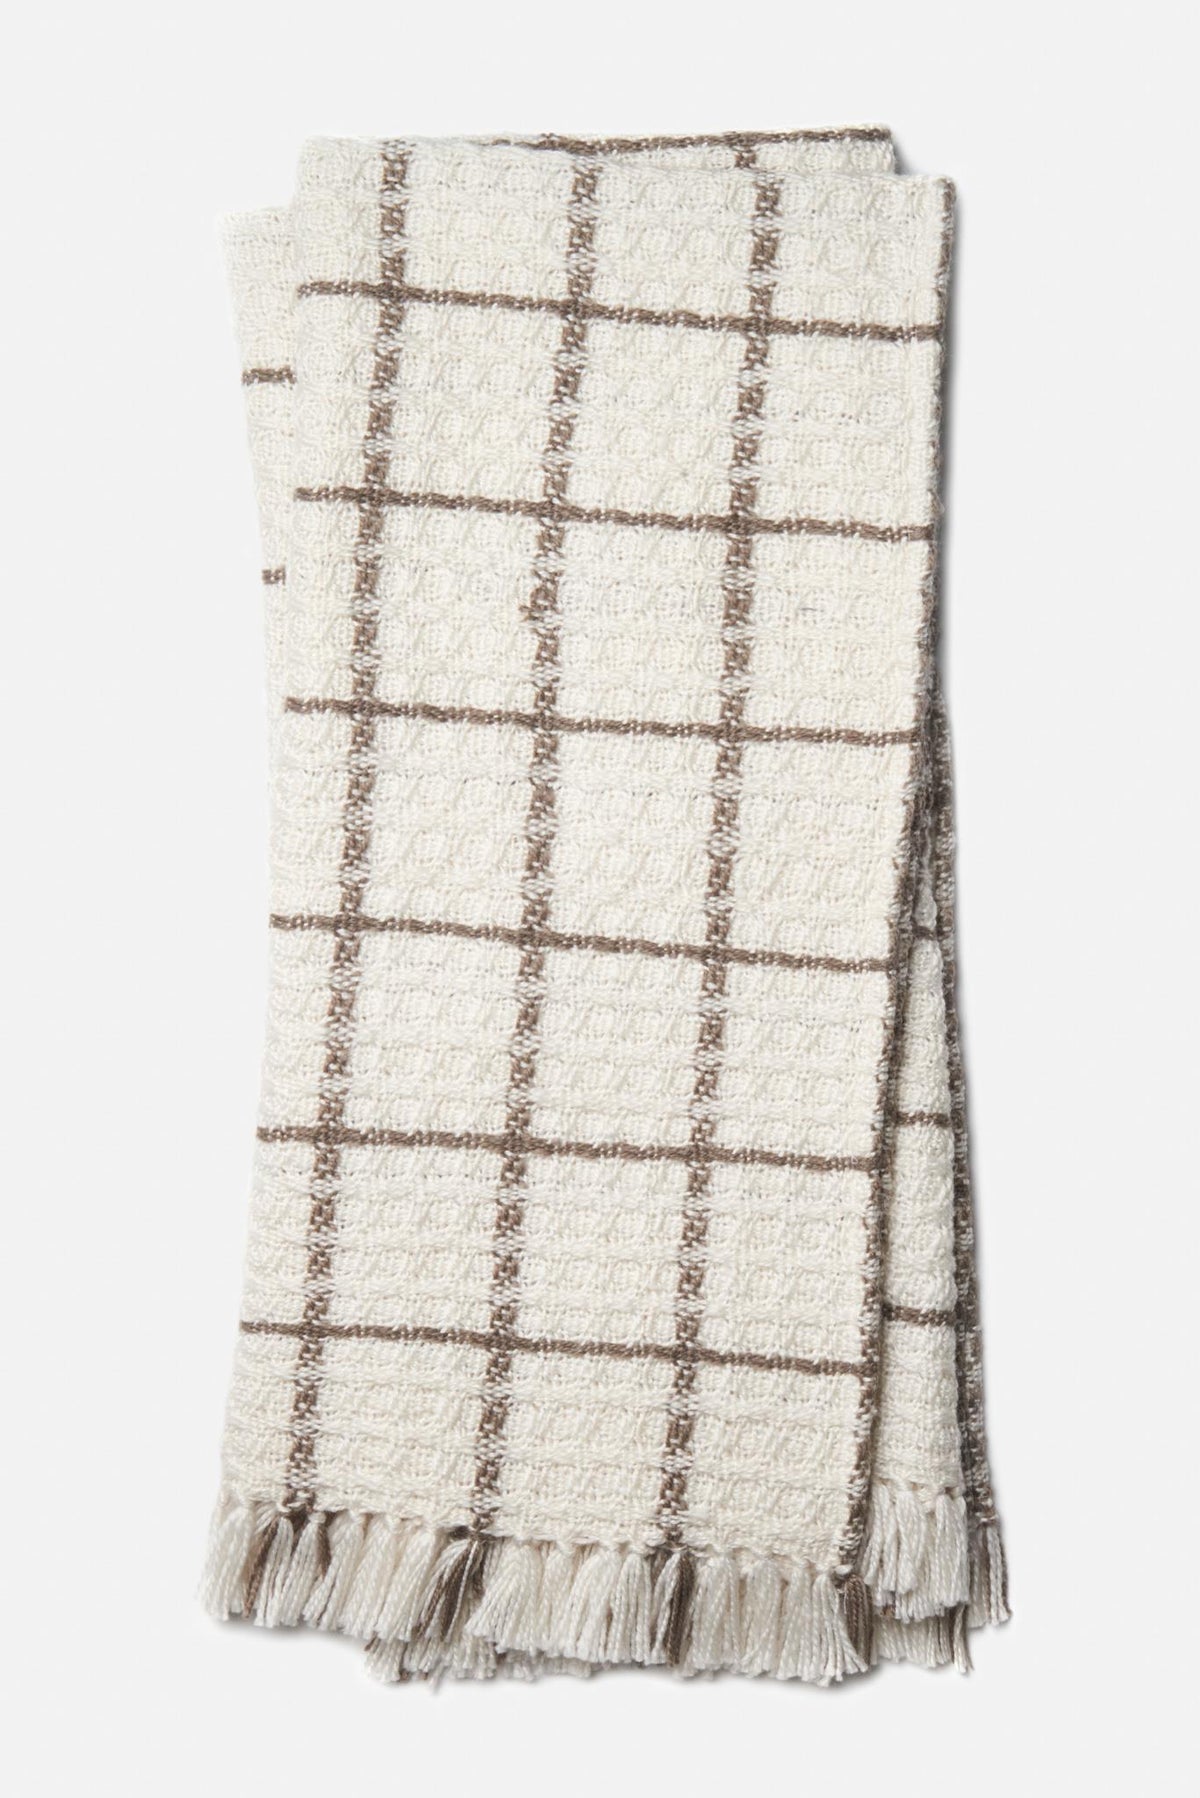 Wren T0036 Ivory/Taupe Throw Blanket - Rug & Home